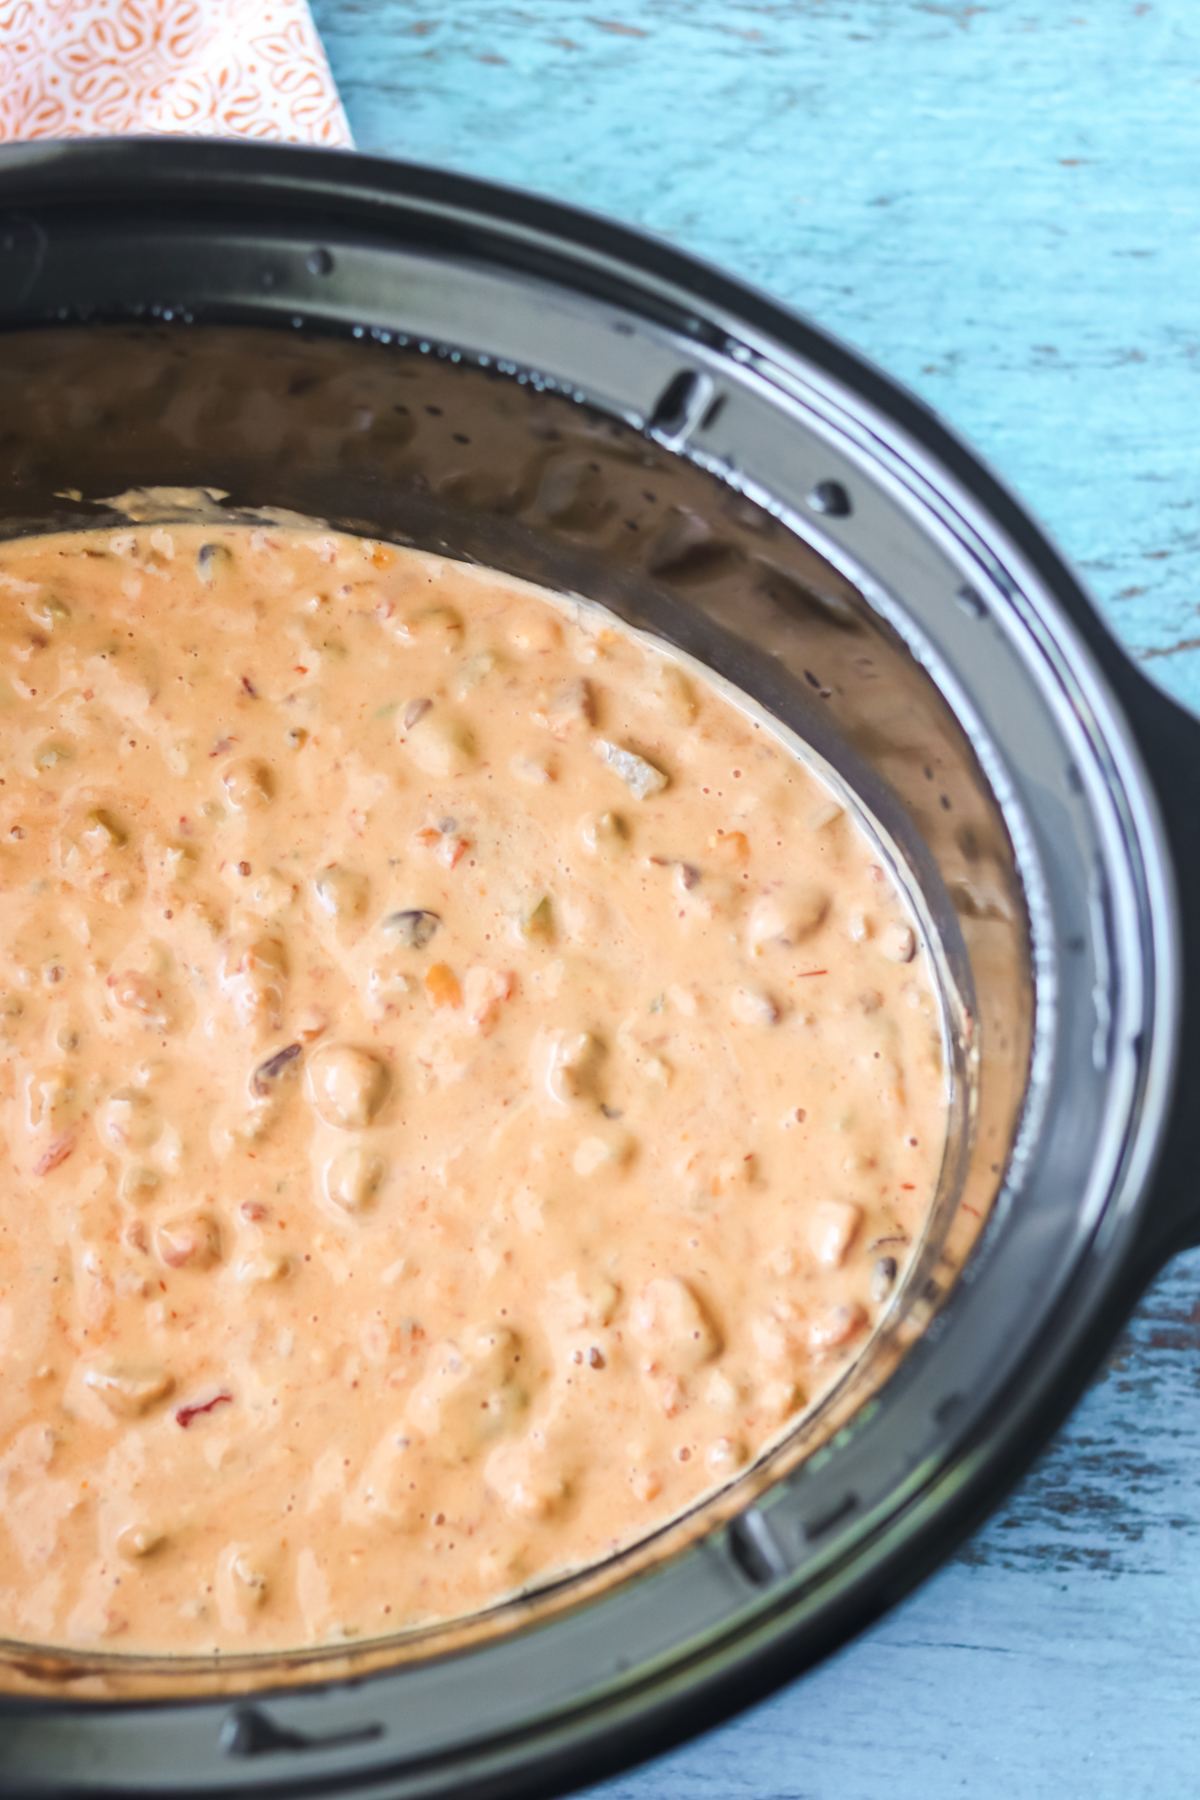 https://easyrecipesfromhome.com/wp-content/uploads/2012/09/Crocpot-Queso-PIN4.jpg